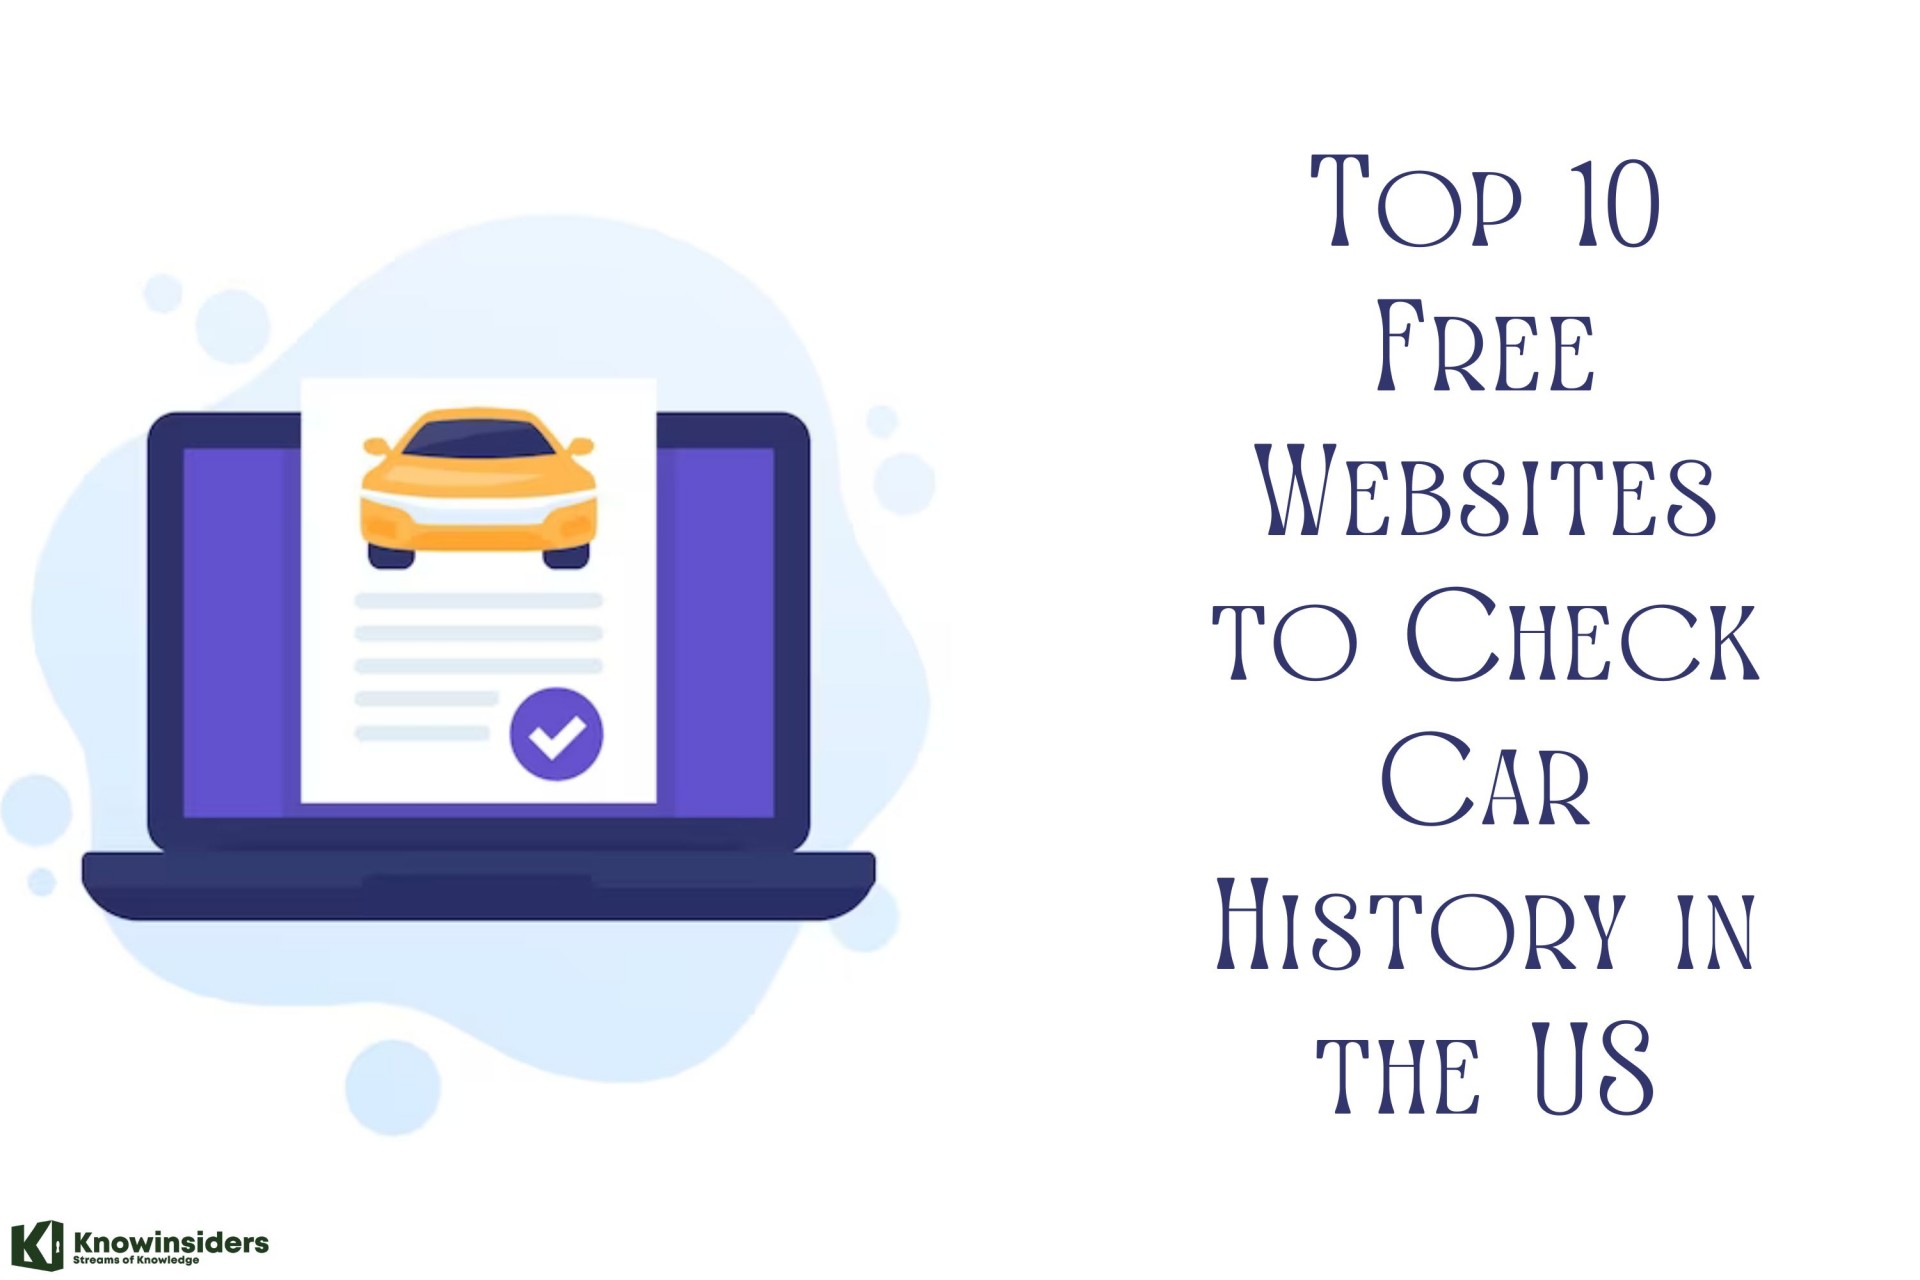 How to Check Car History in the U.S - Top 10 Free Websites